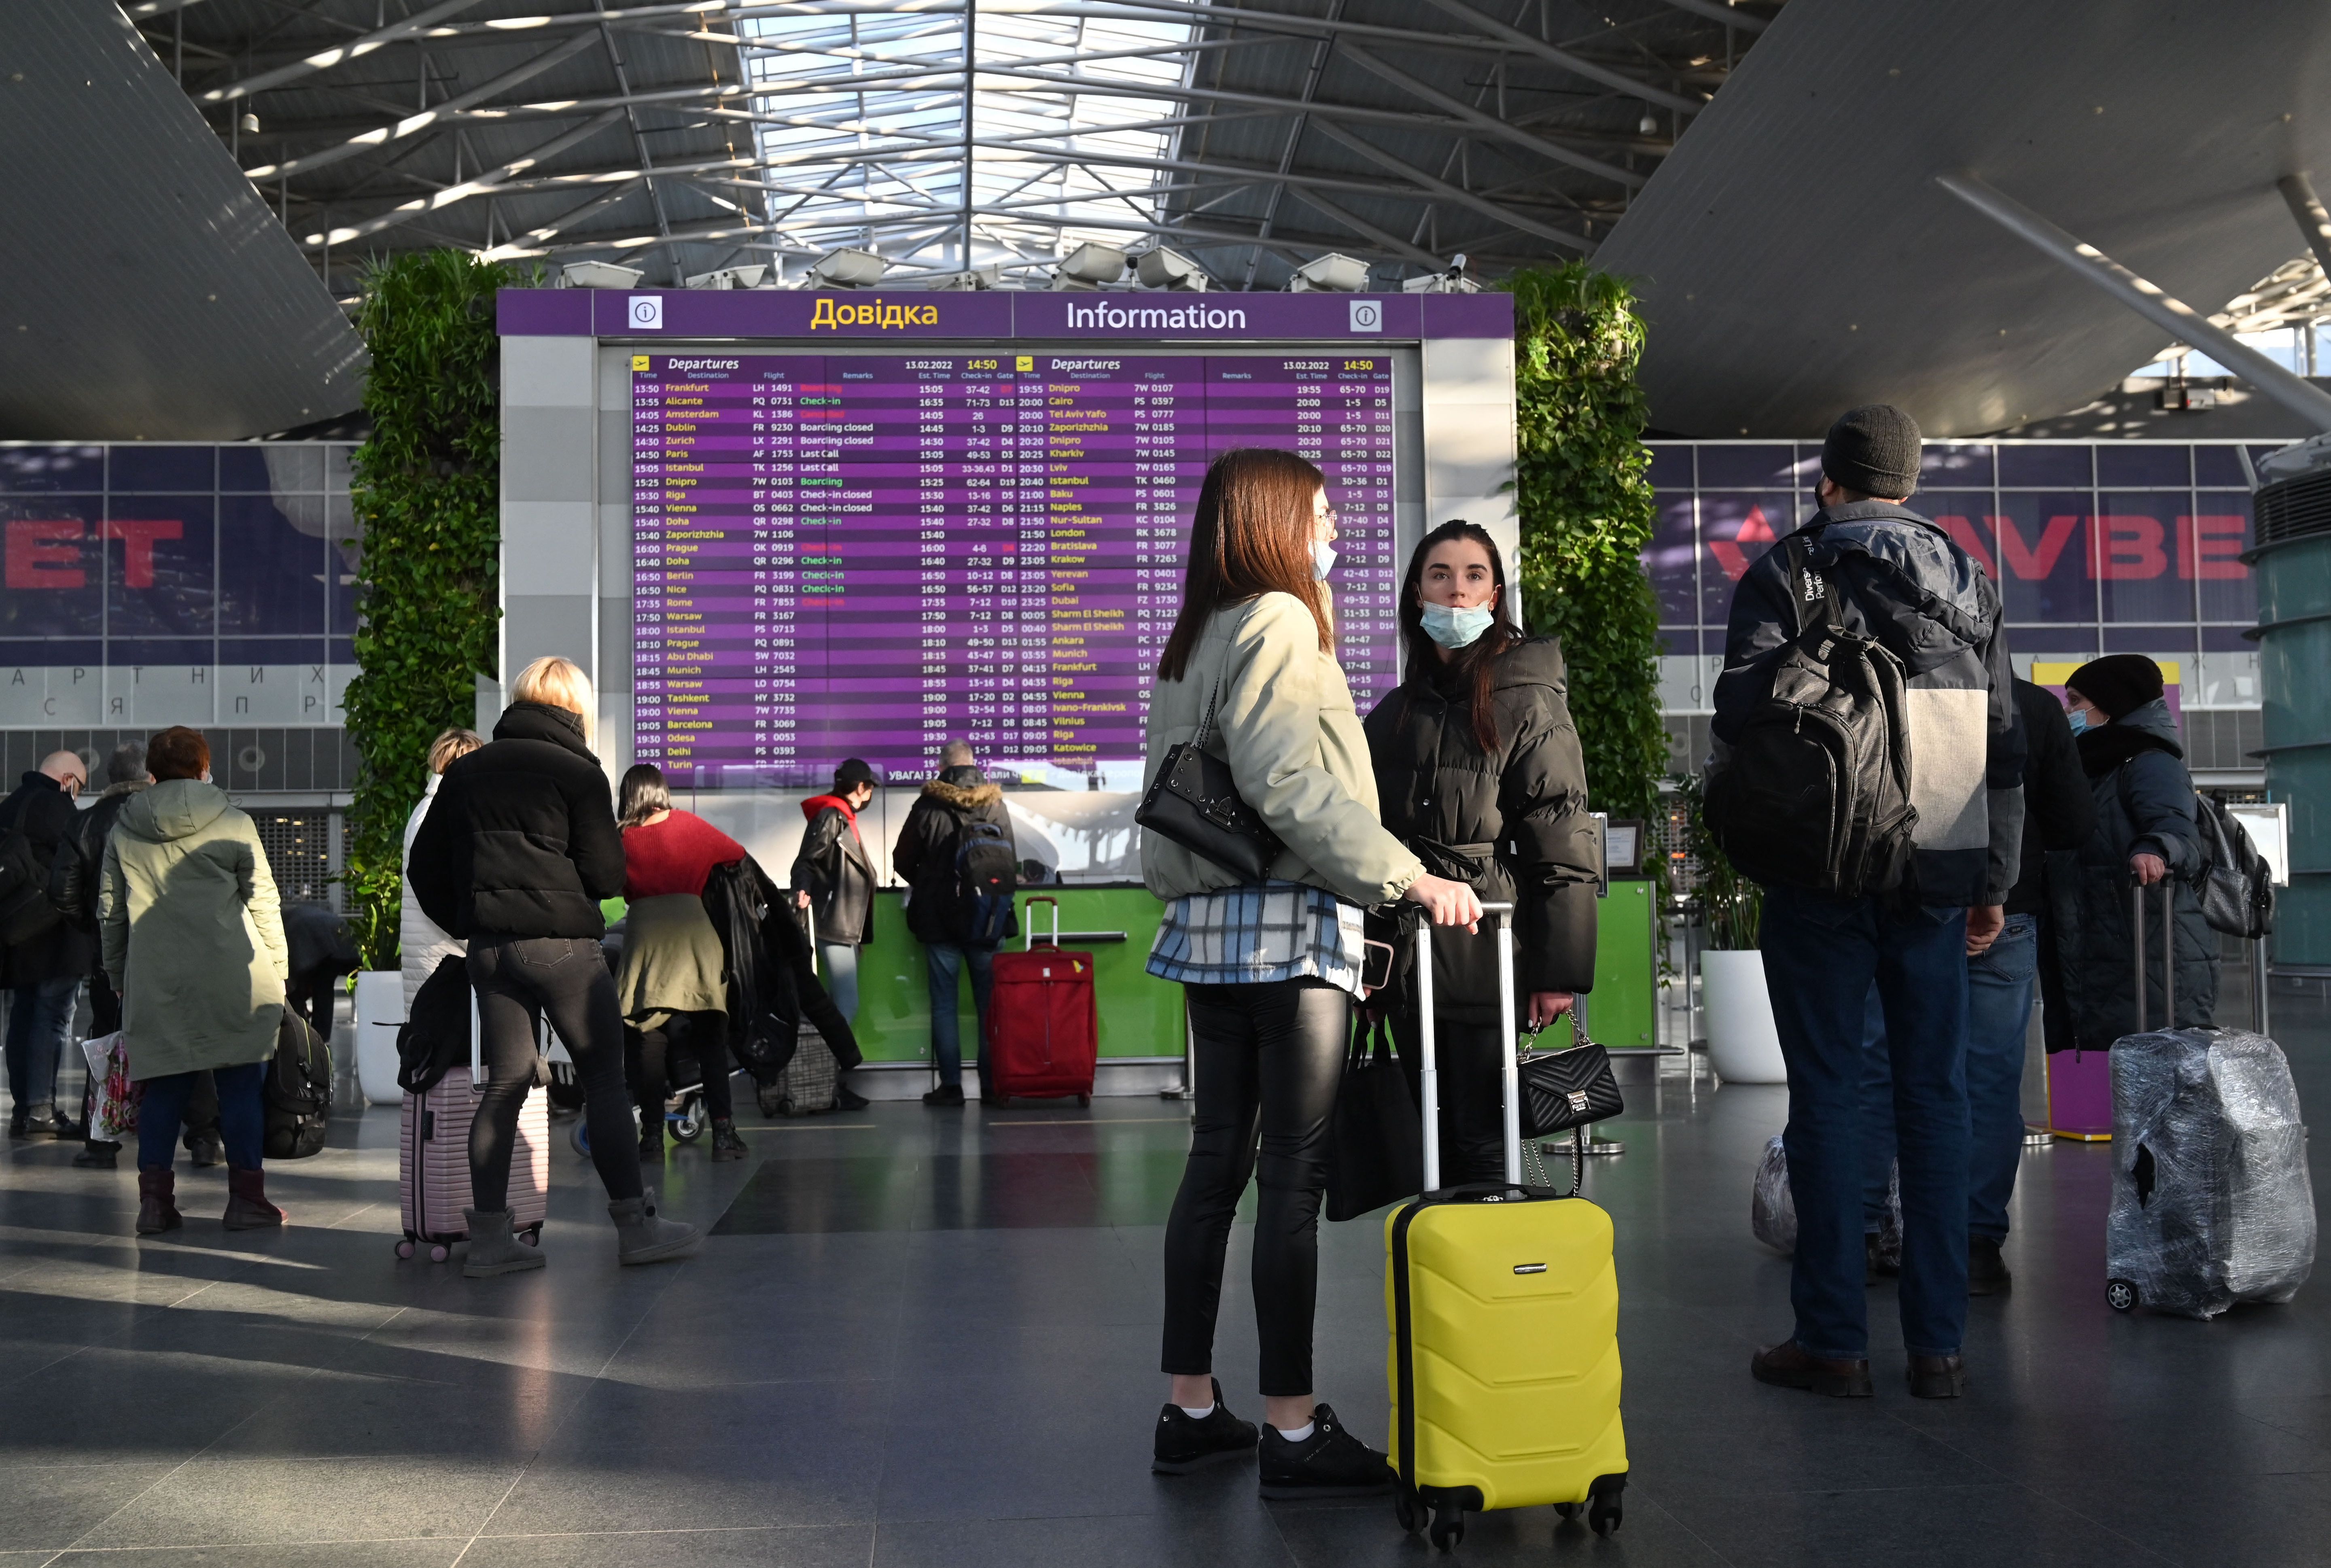 https://www.gettyimages.com.au/detail/news-photo/travellers-wait-at-the-the-departures-board-ahead-of-their-news-photo/1238442500?adppopup=true